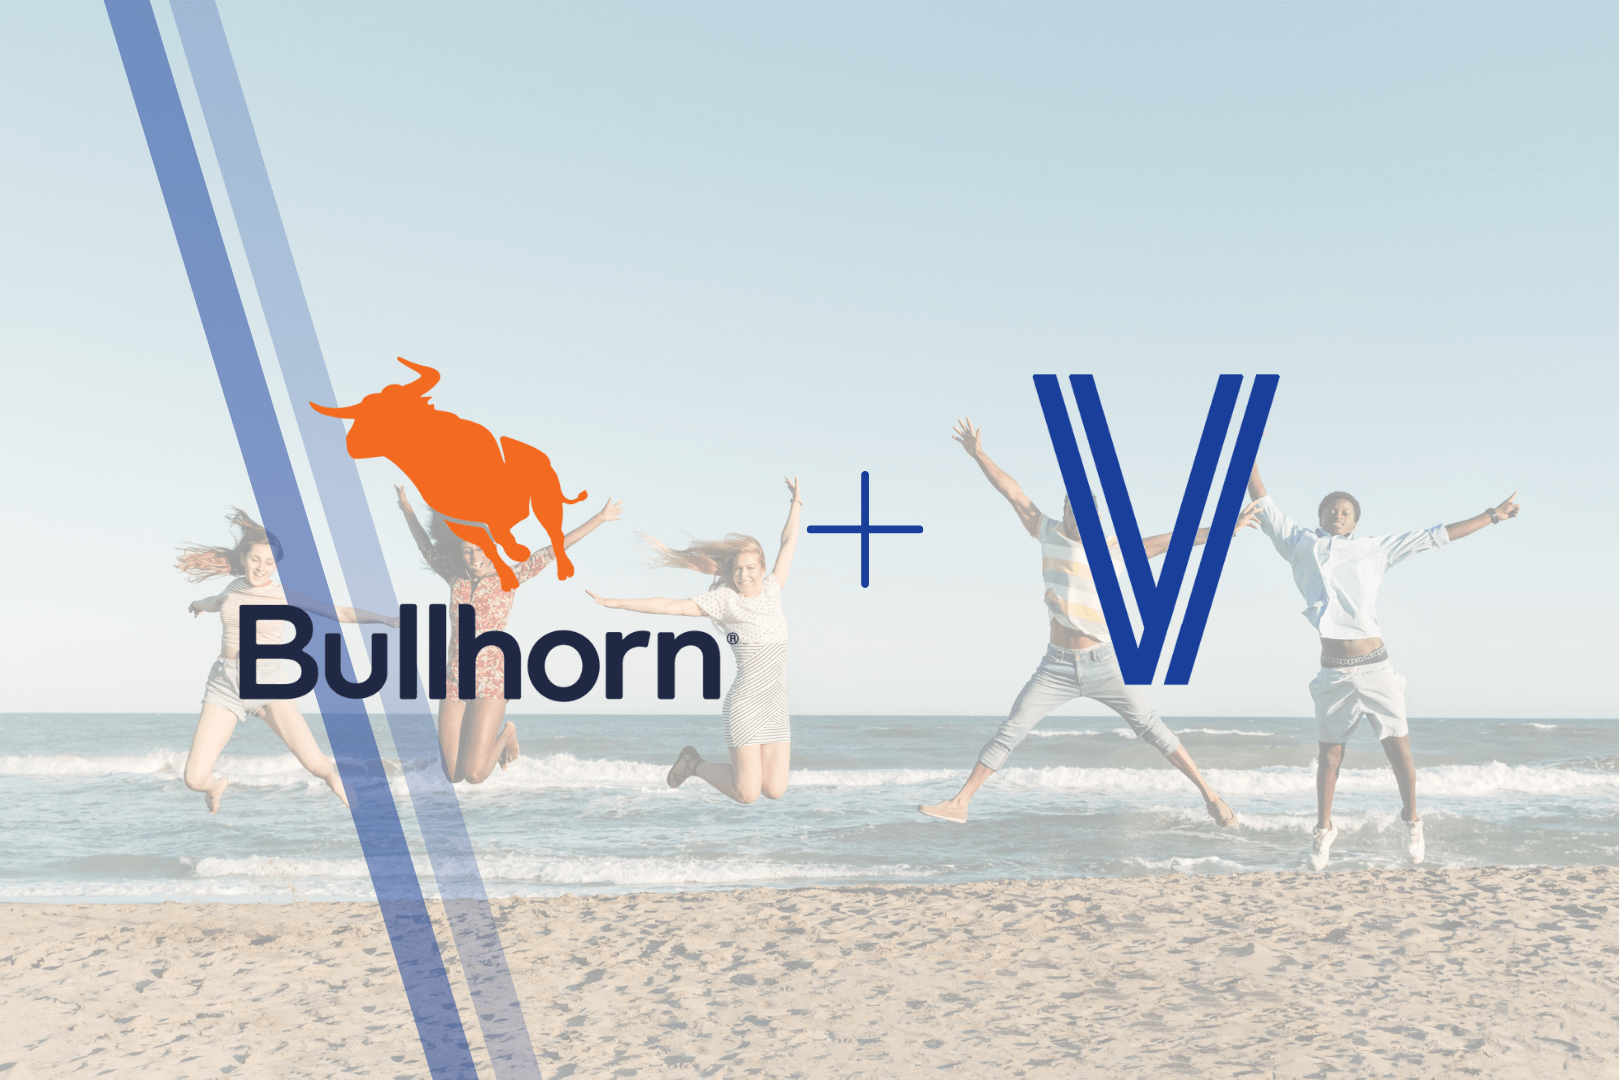 Wave a red flag – we’re going live with Bullhorn!